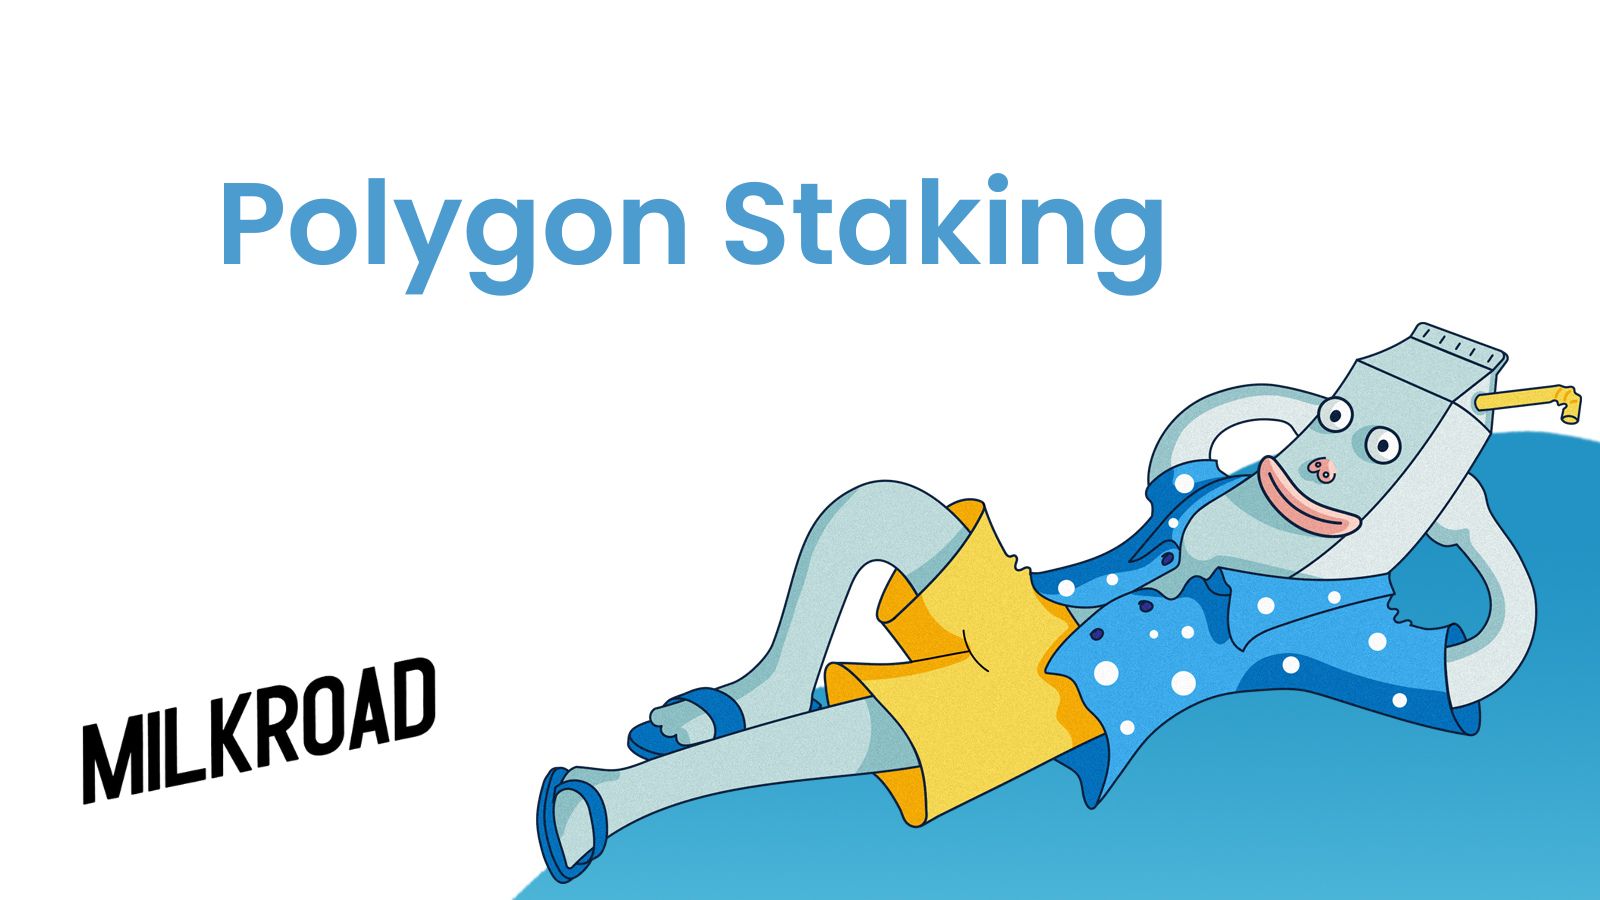 Polygon Staking